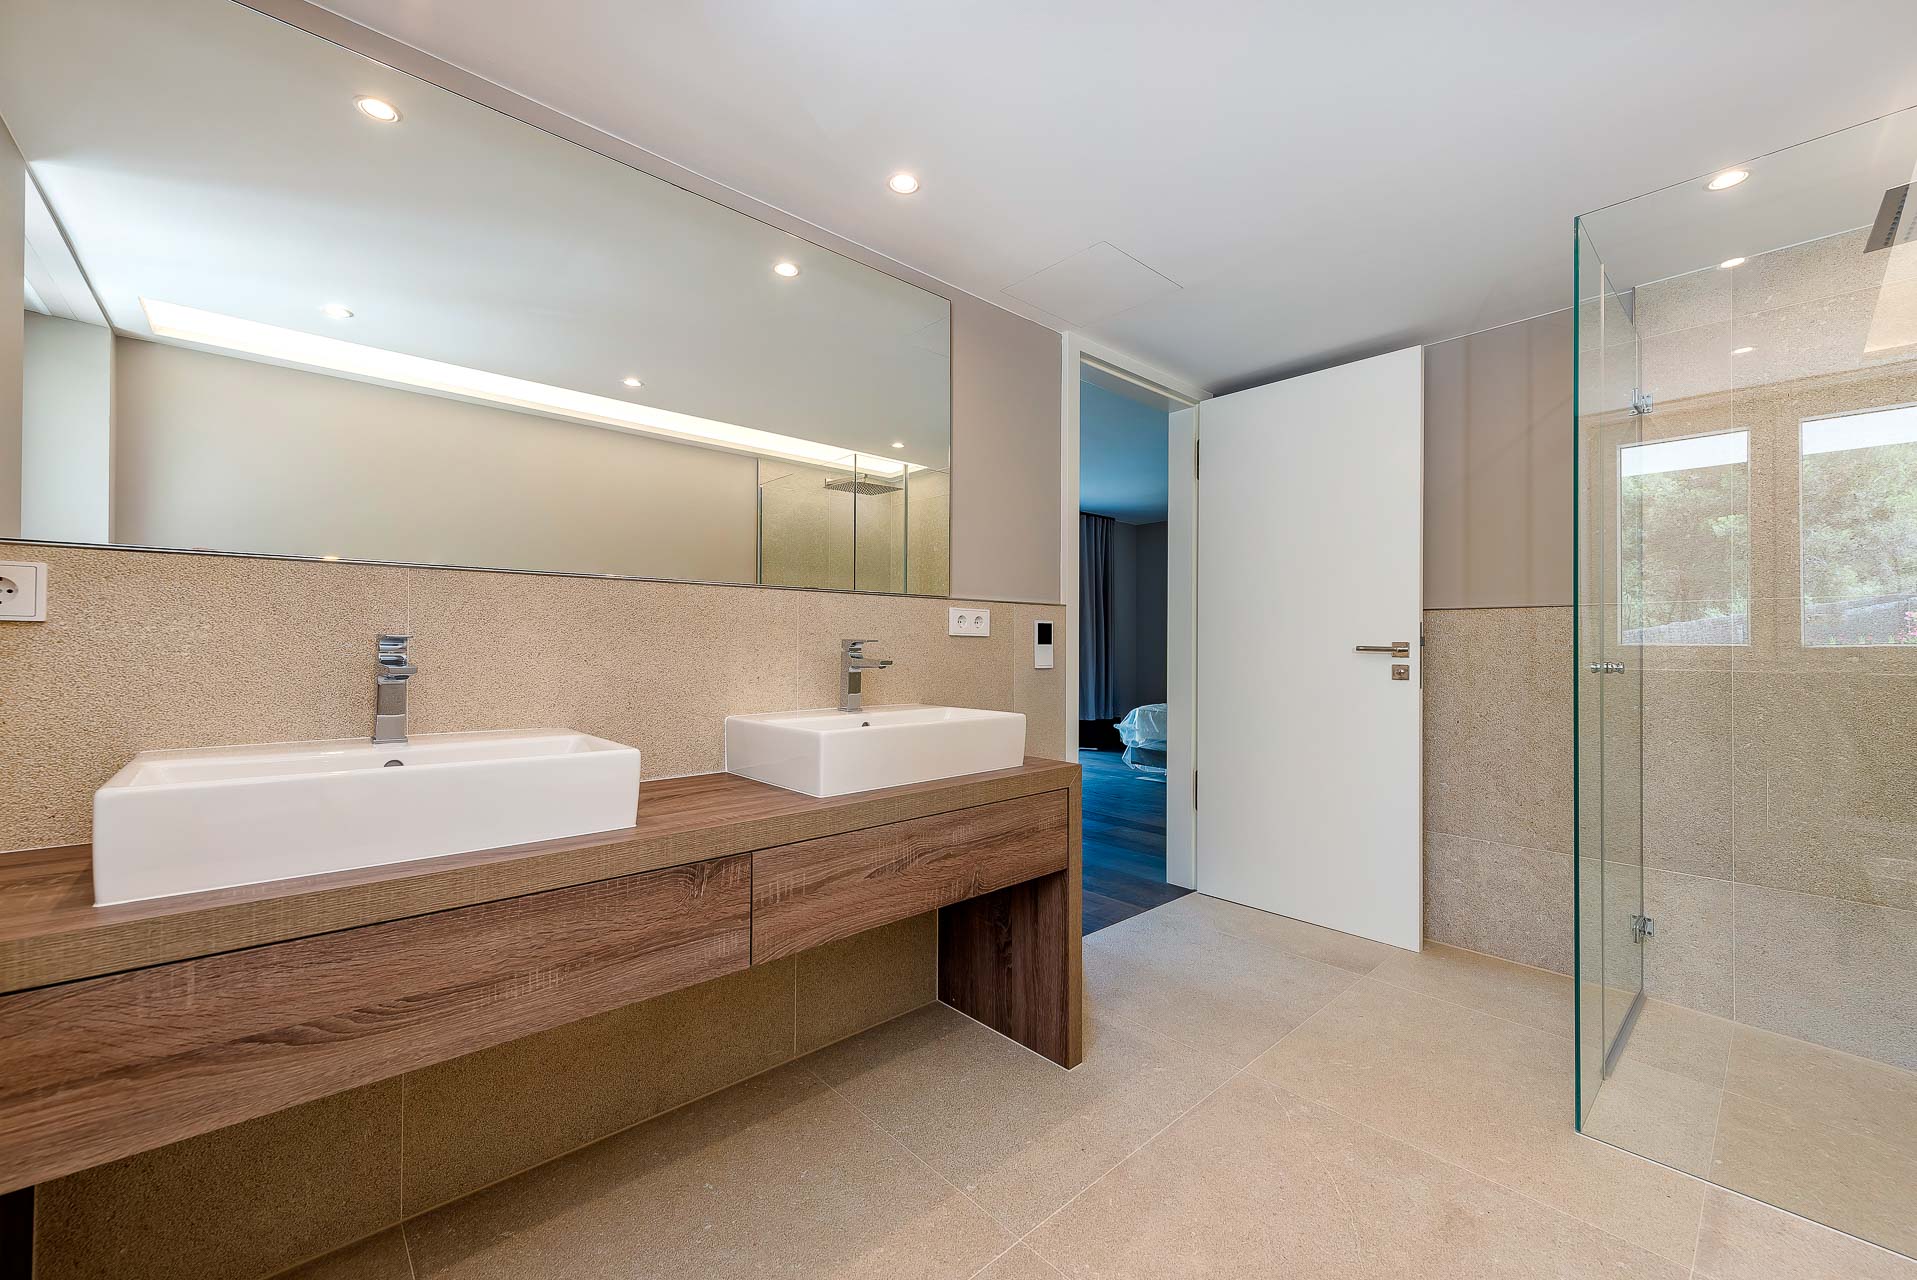 Exclusive completely renovated villa in second sea line in Cala Fornells - Bathroom 2